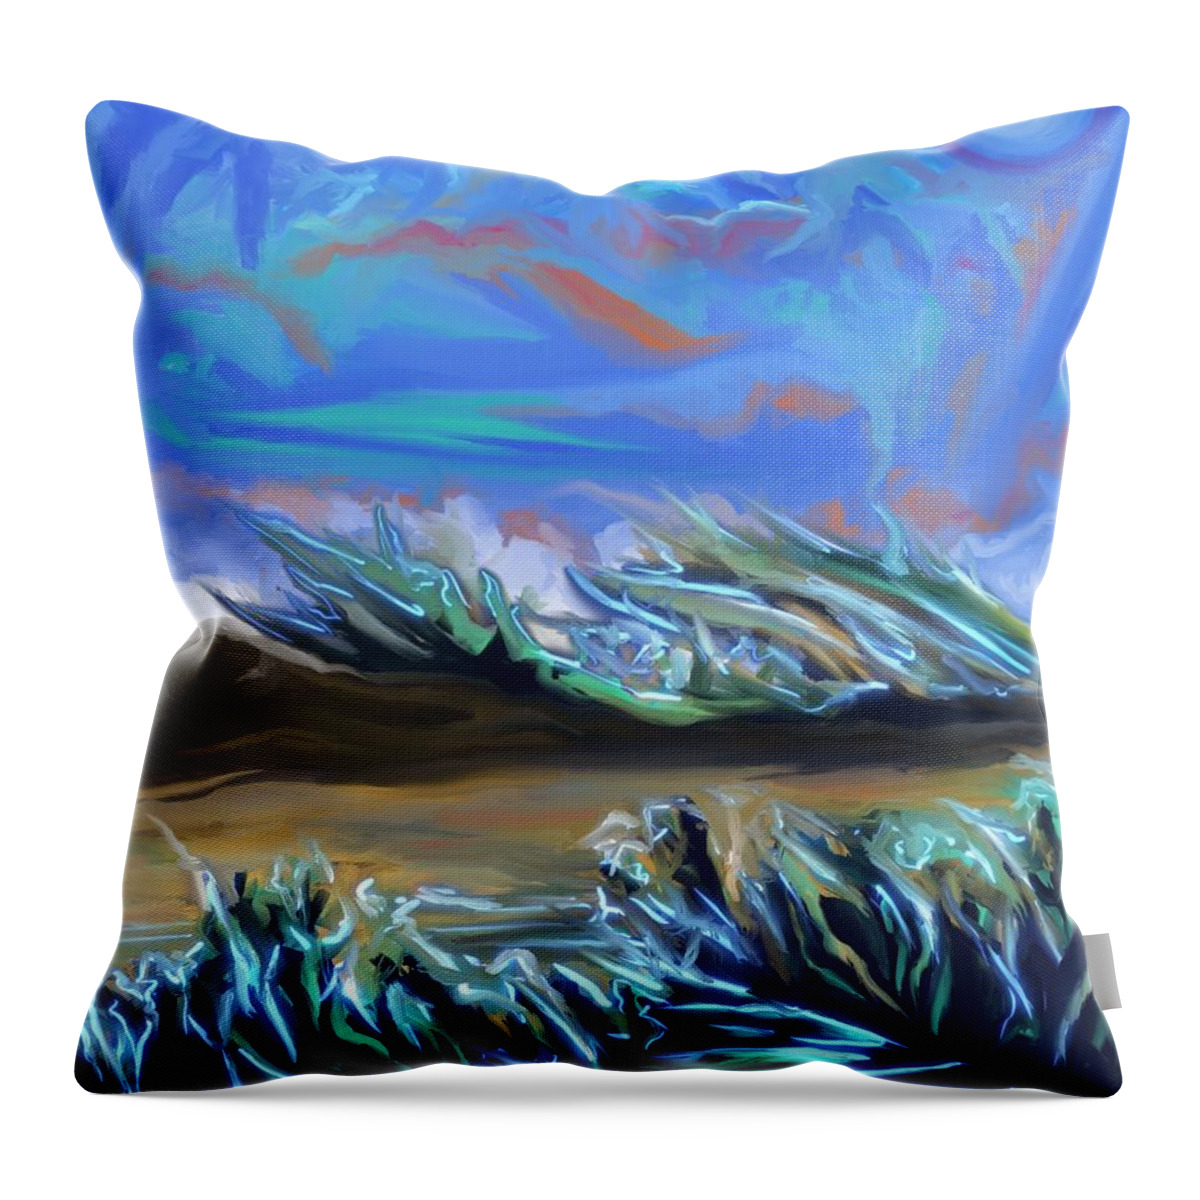 Landscape Throw Pillow featuring the digital art Last Light by Angela Weddle